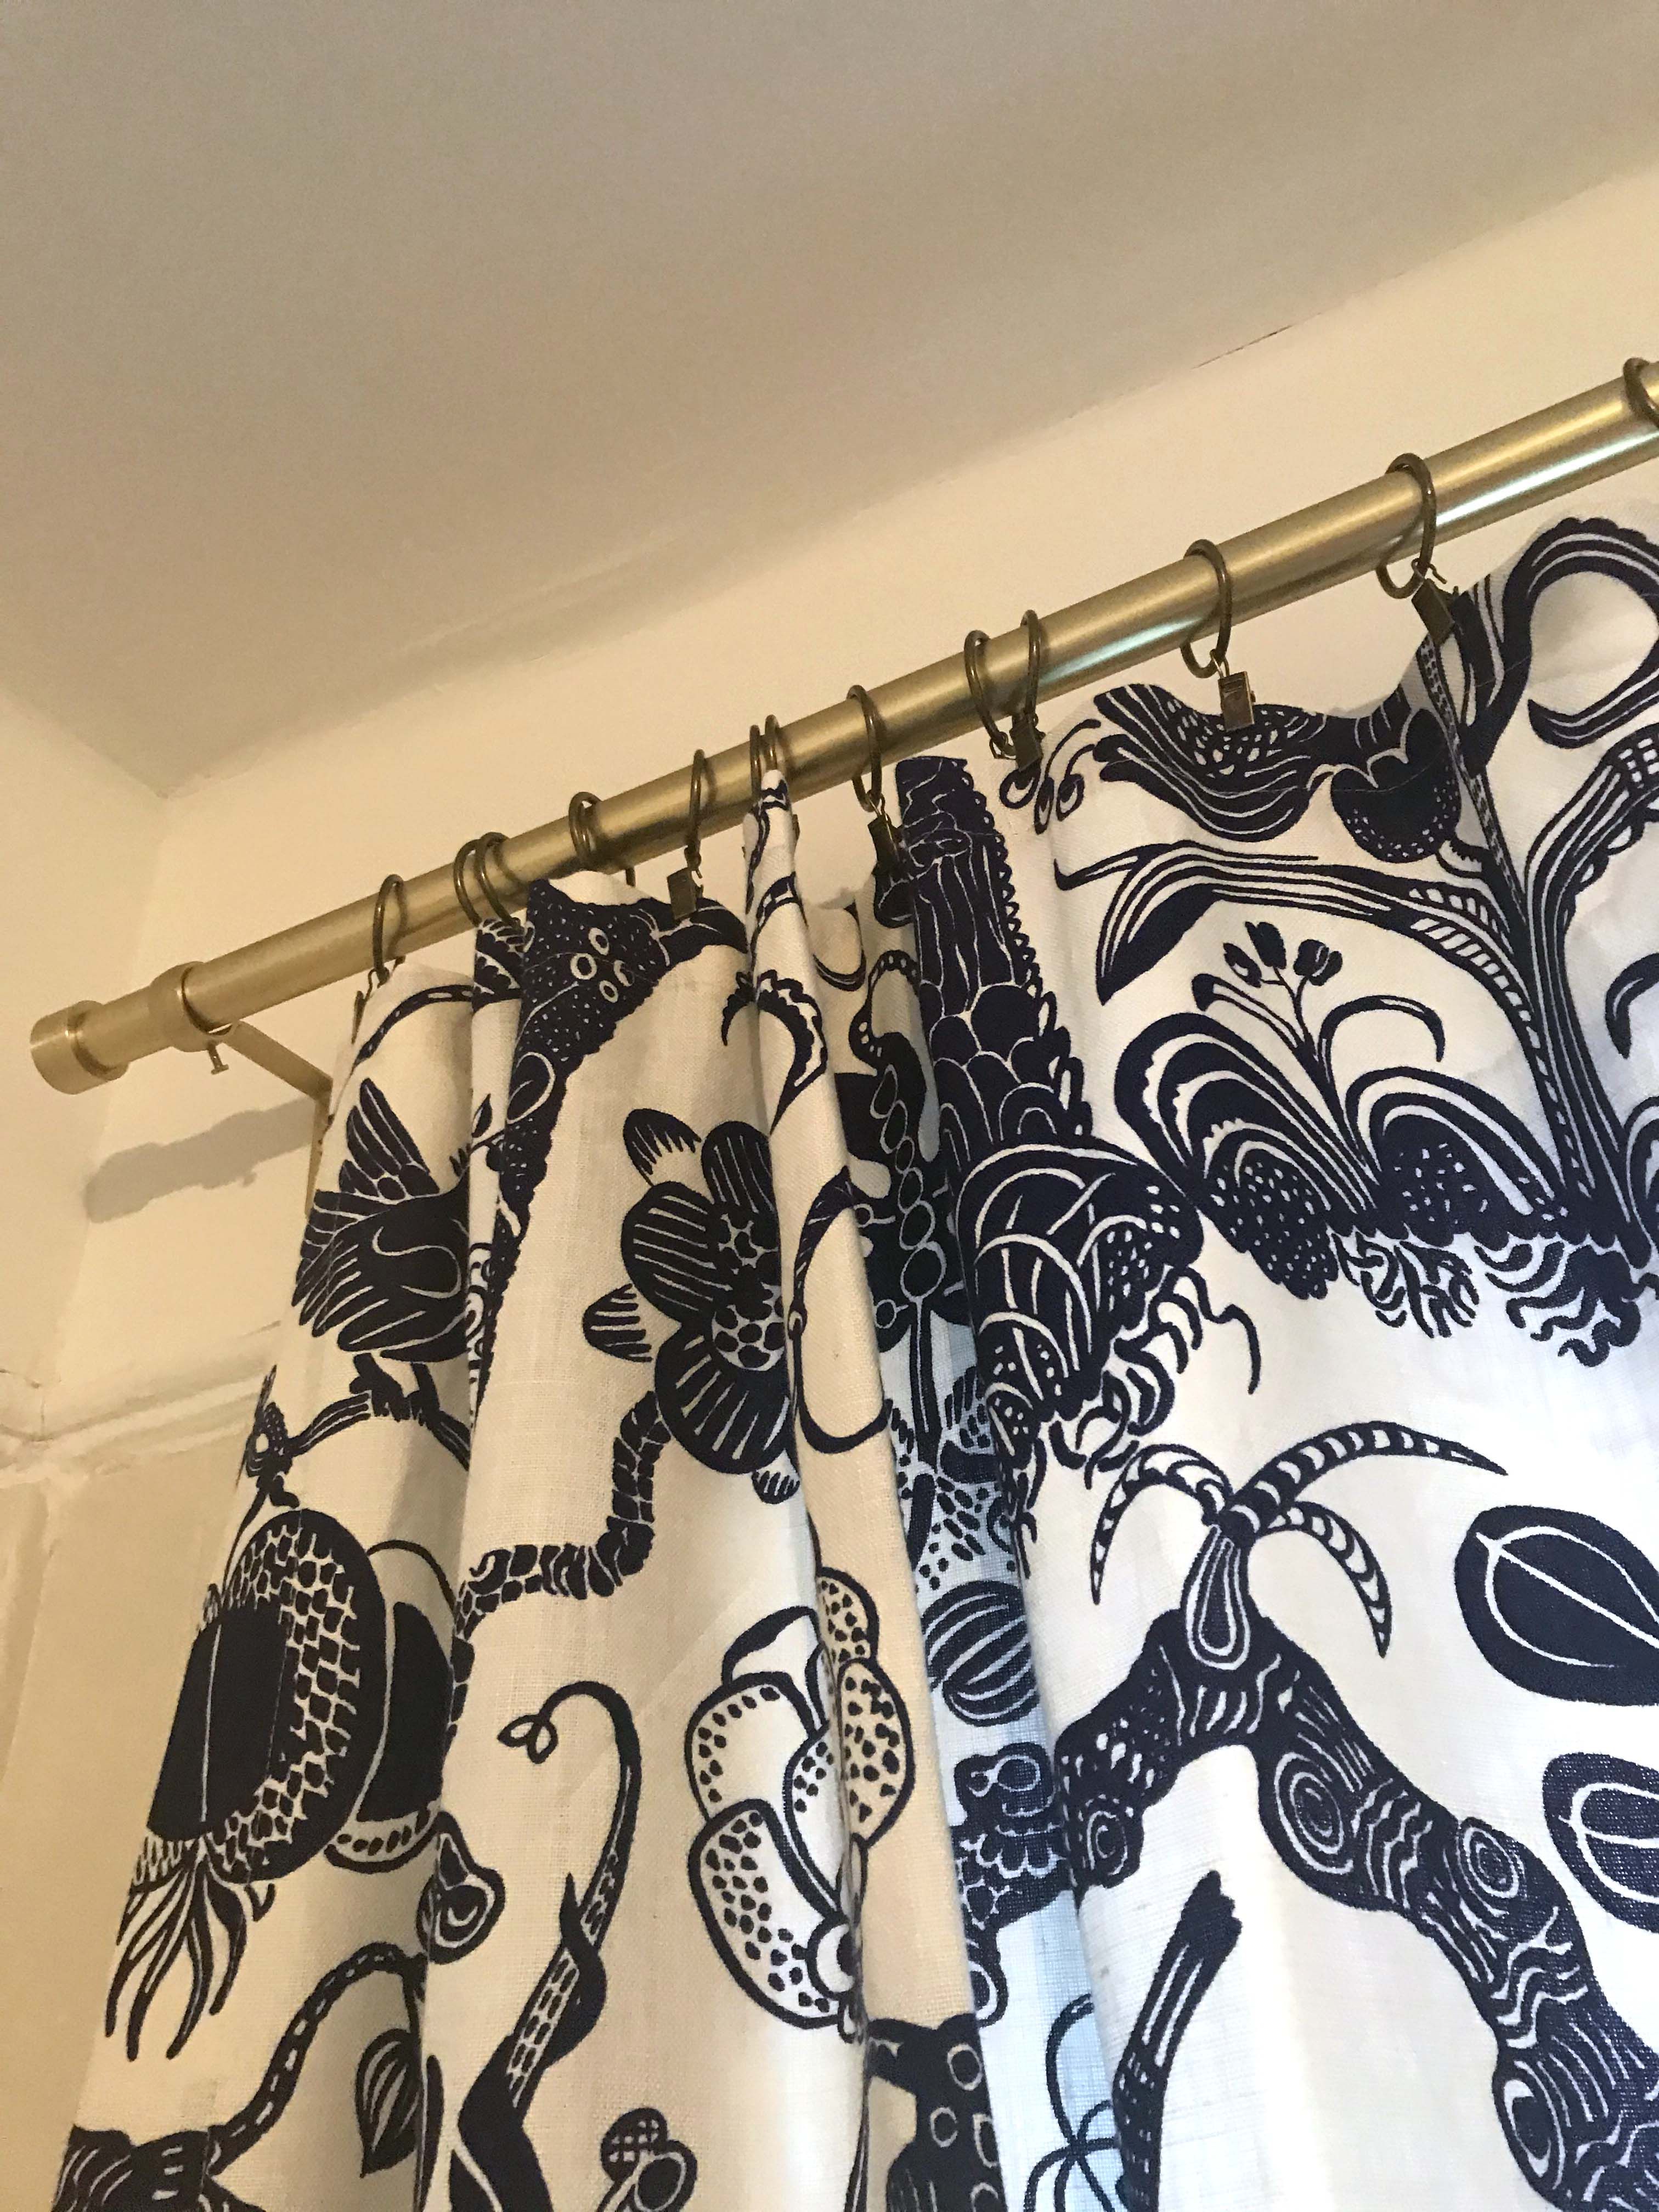 These 7 Curtain Clips Are My Favorite, Shower Curtain Hooks With Clips